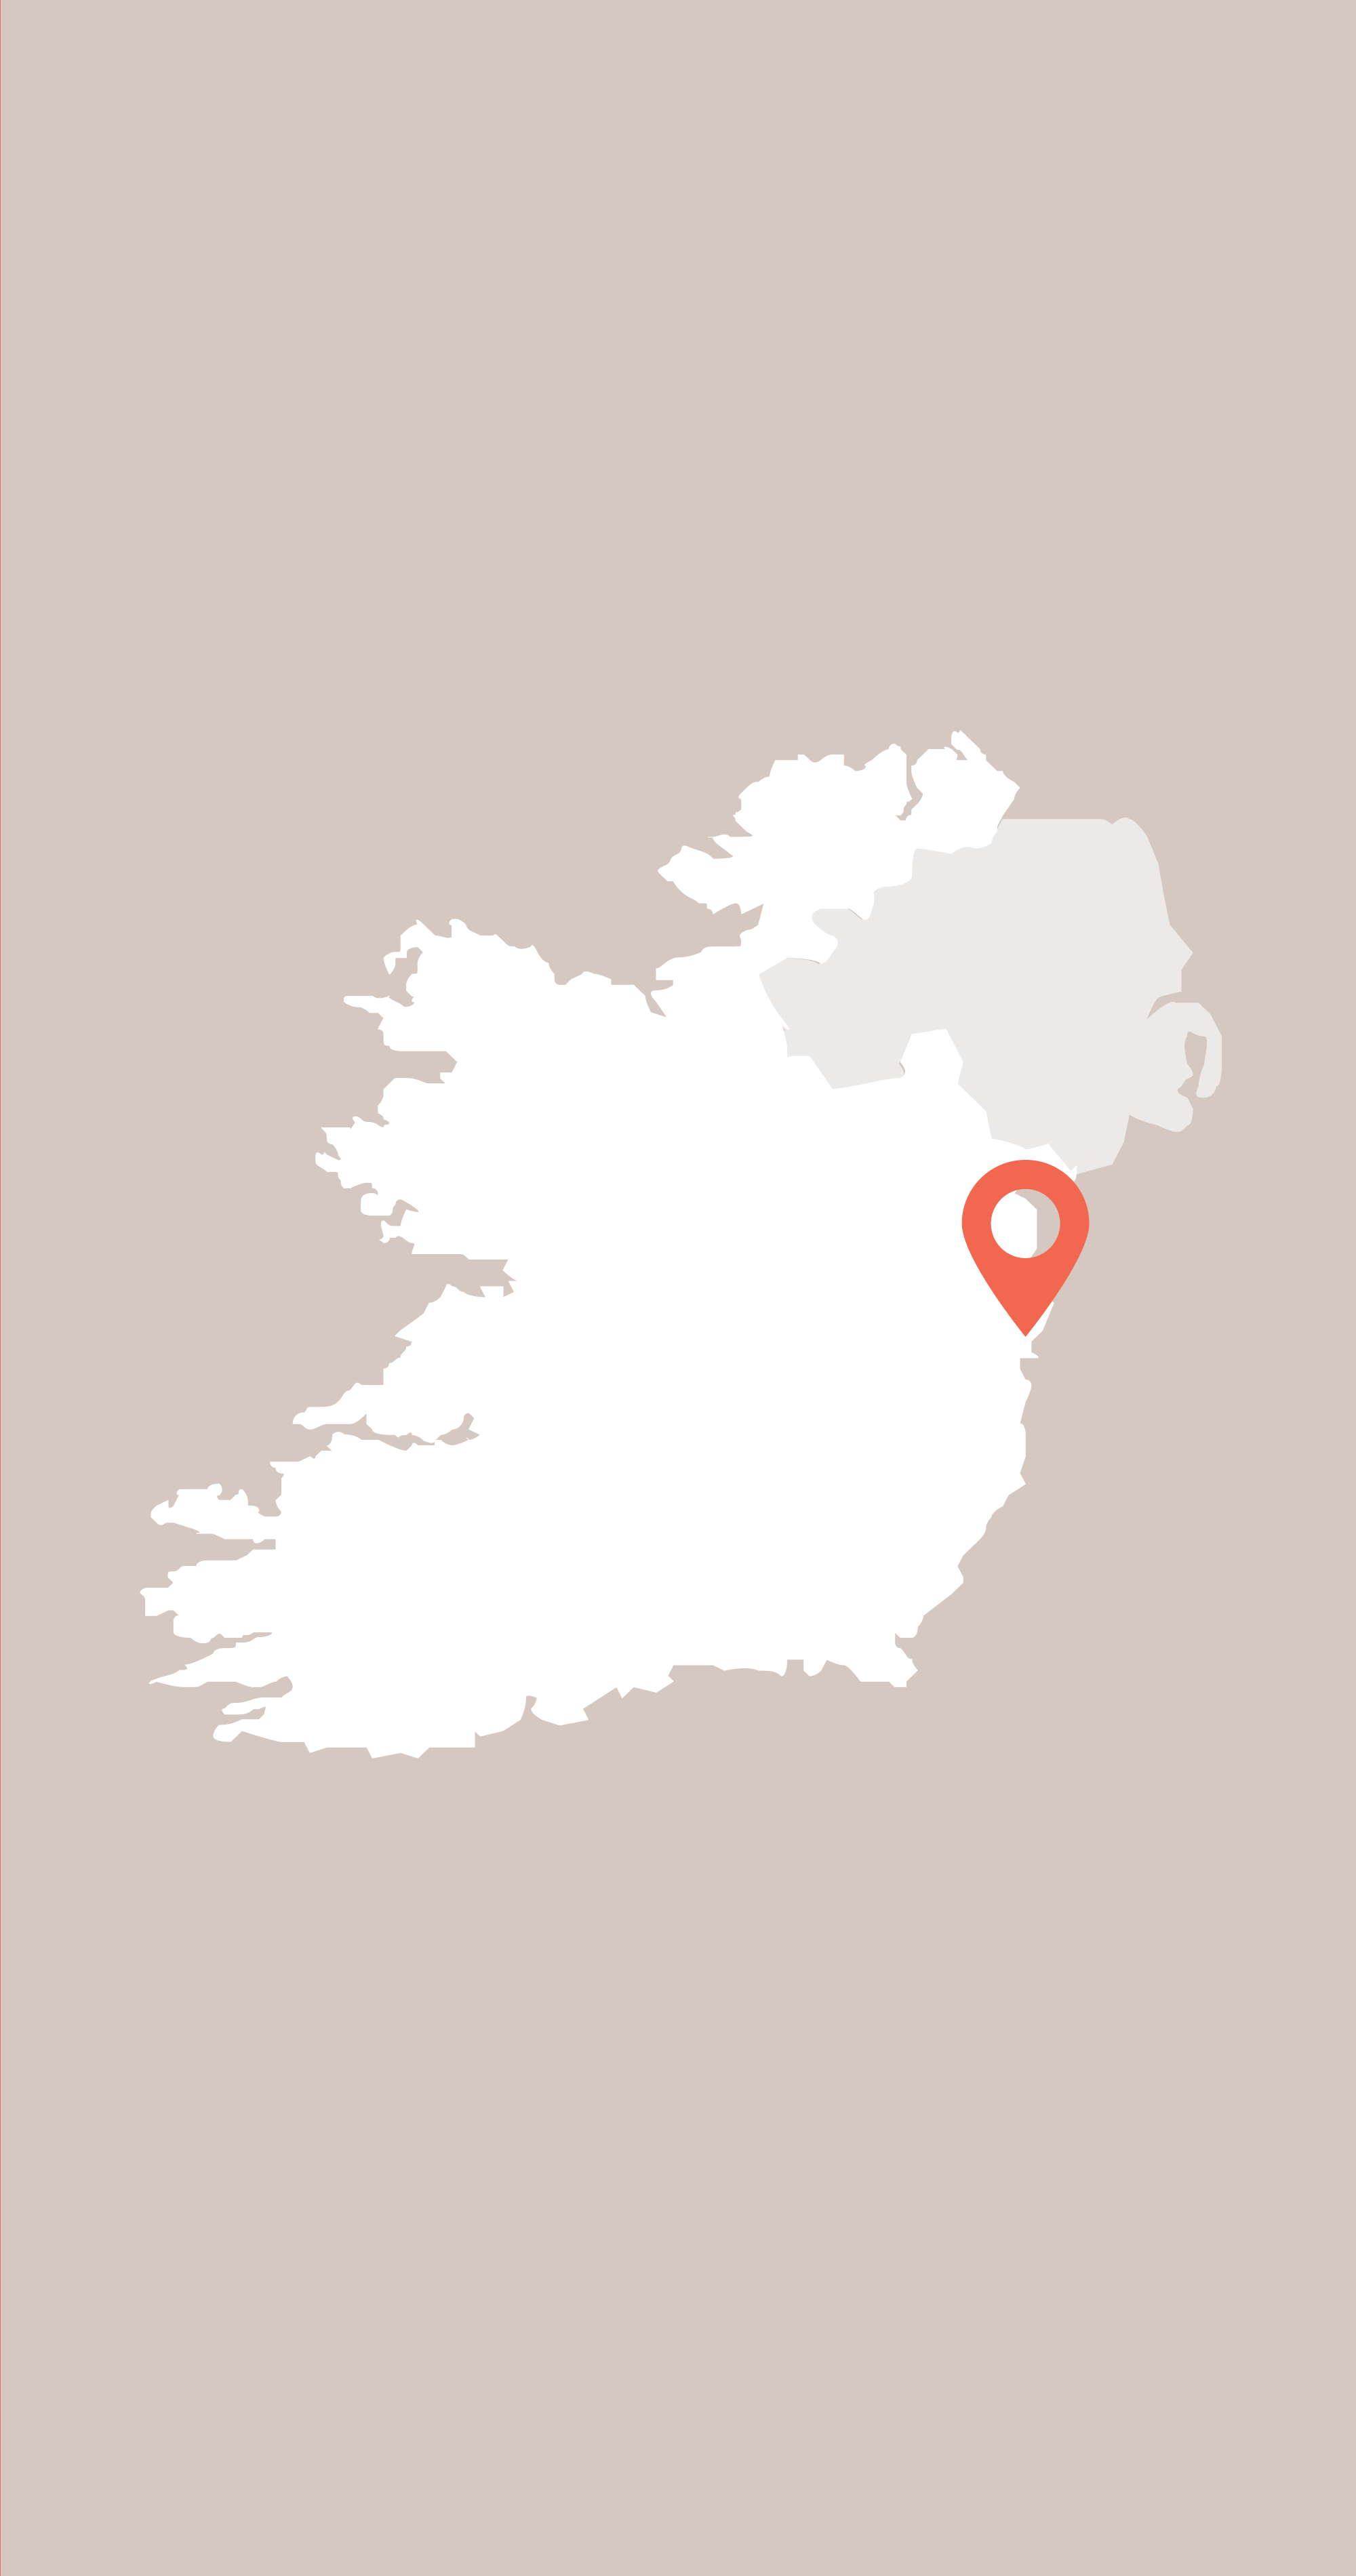 Map of Ireland showing a map pin on Dublin